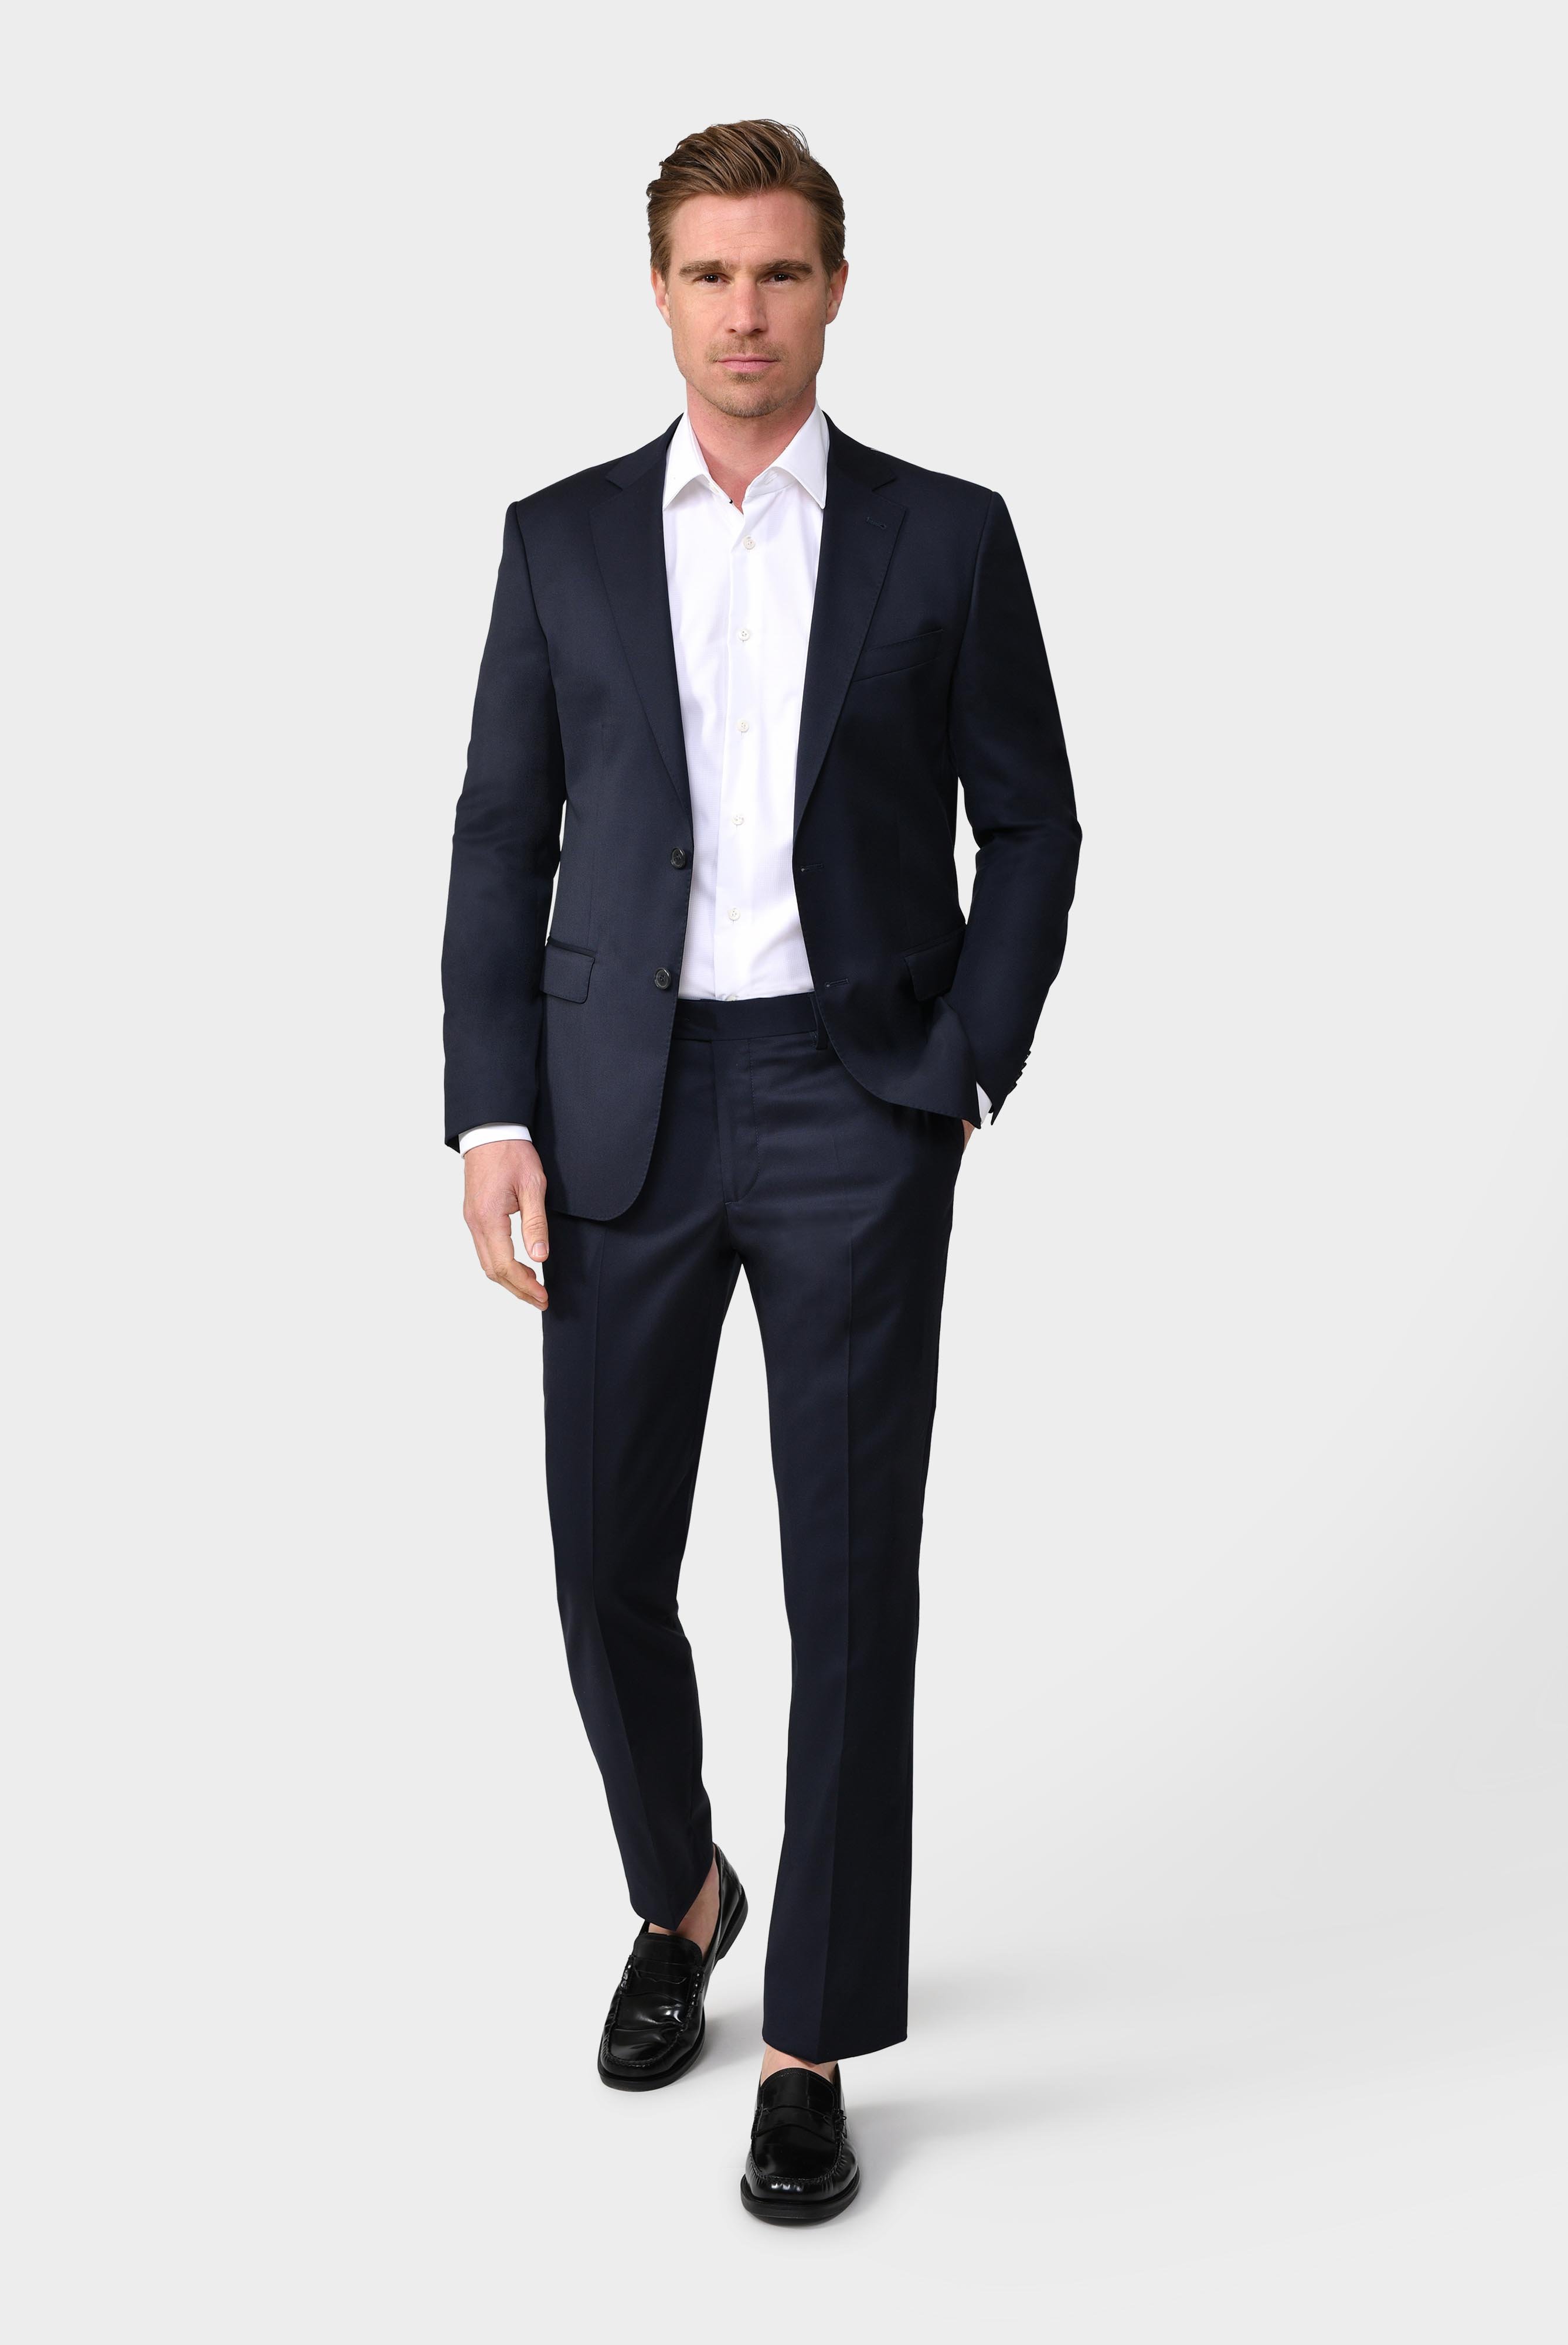 Jeans & Trousers+Men''s pants made of merino wool+80.7804.16.H01000.780.29